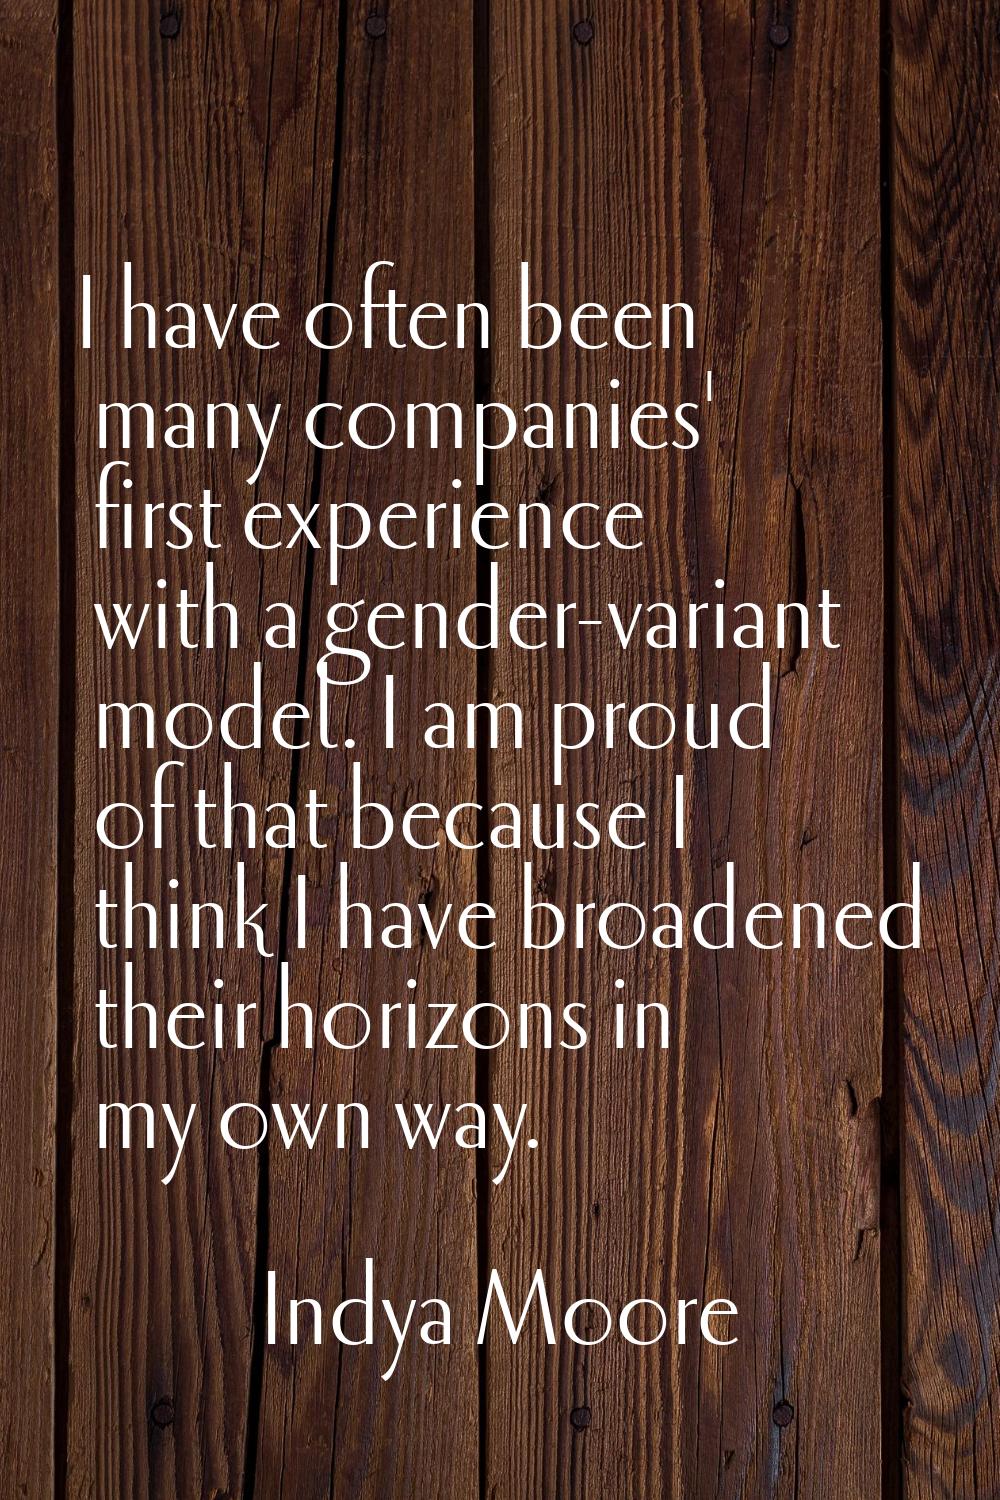 I have often been many companies' first experience with a gender-variant model. I am proud of that 